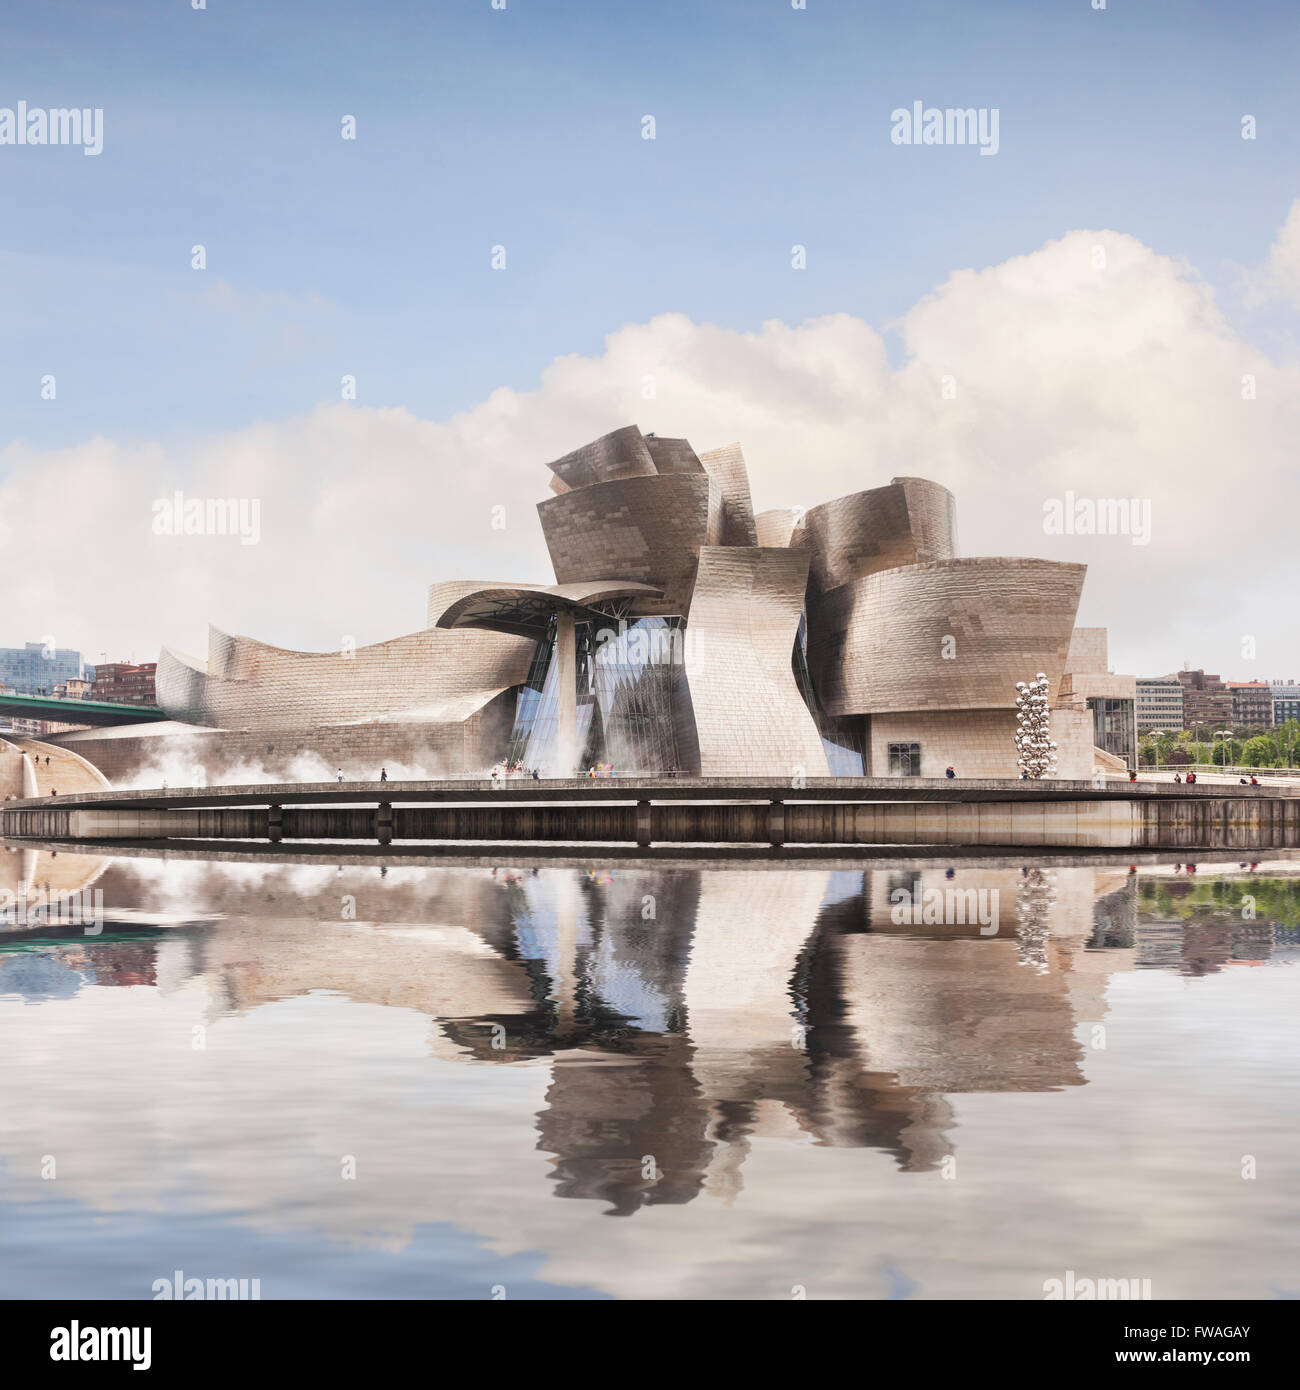 The Guggenheim Museum by Frank Gehry reflected in the River Nervion, Bilbao, Basque Country, Spain Stock Photo